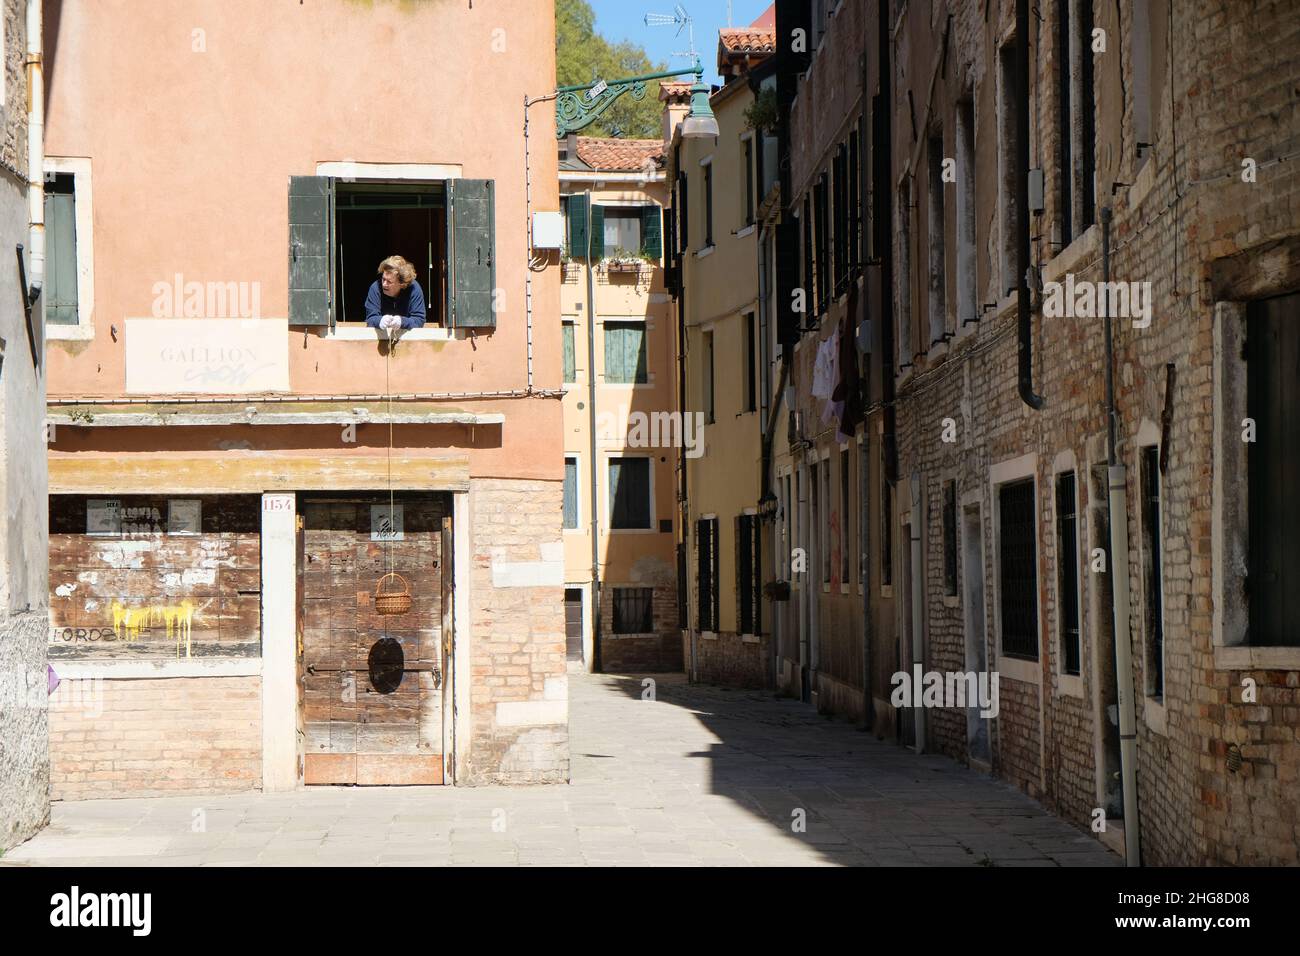 Venice deserted  during lockdown in an unprecedented clampdown aimed at beating the coronavirus, in Venice, Italy, April 8, 2020. (MvS) Stock Photo